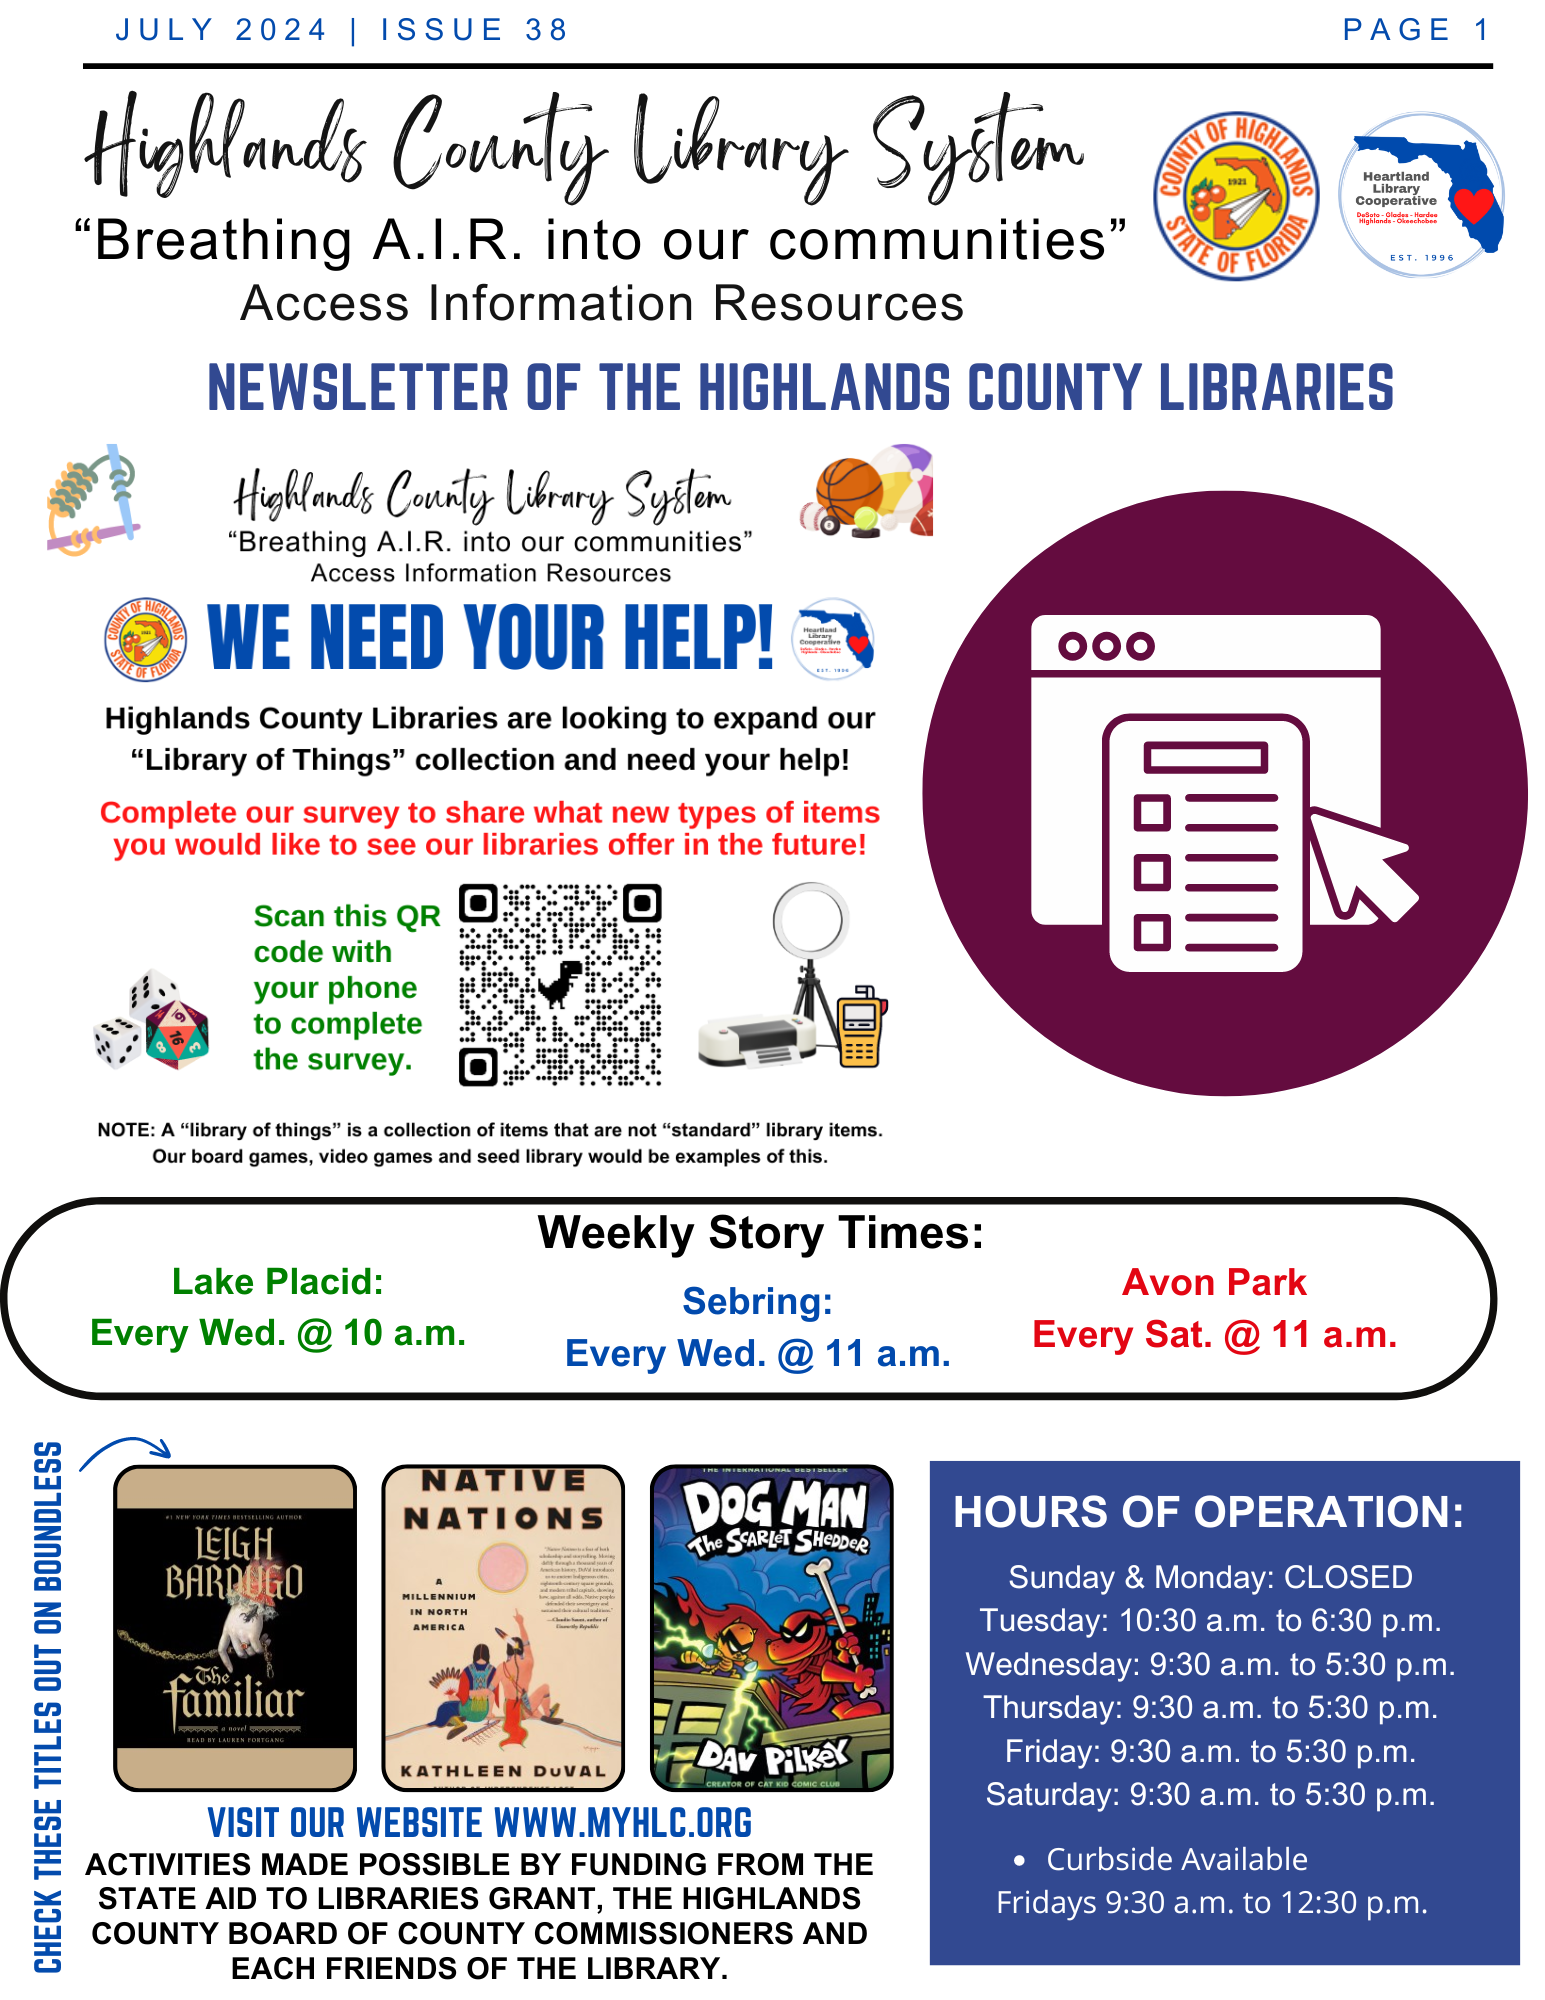 This is page one of the Highlands County Library System July 2024 newsletter. The full PDF version of the newsletter is available by clicking on the image.